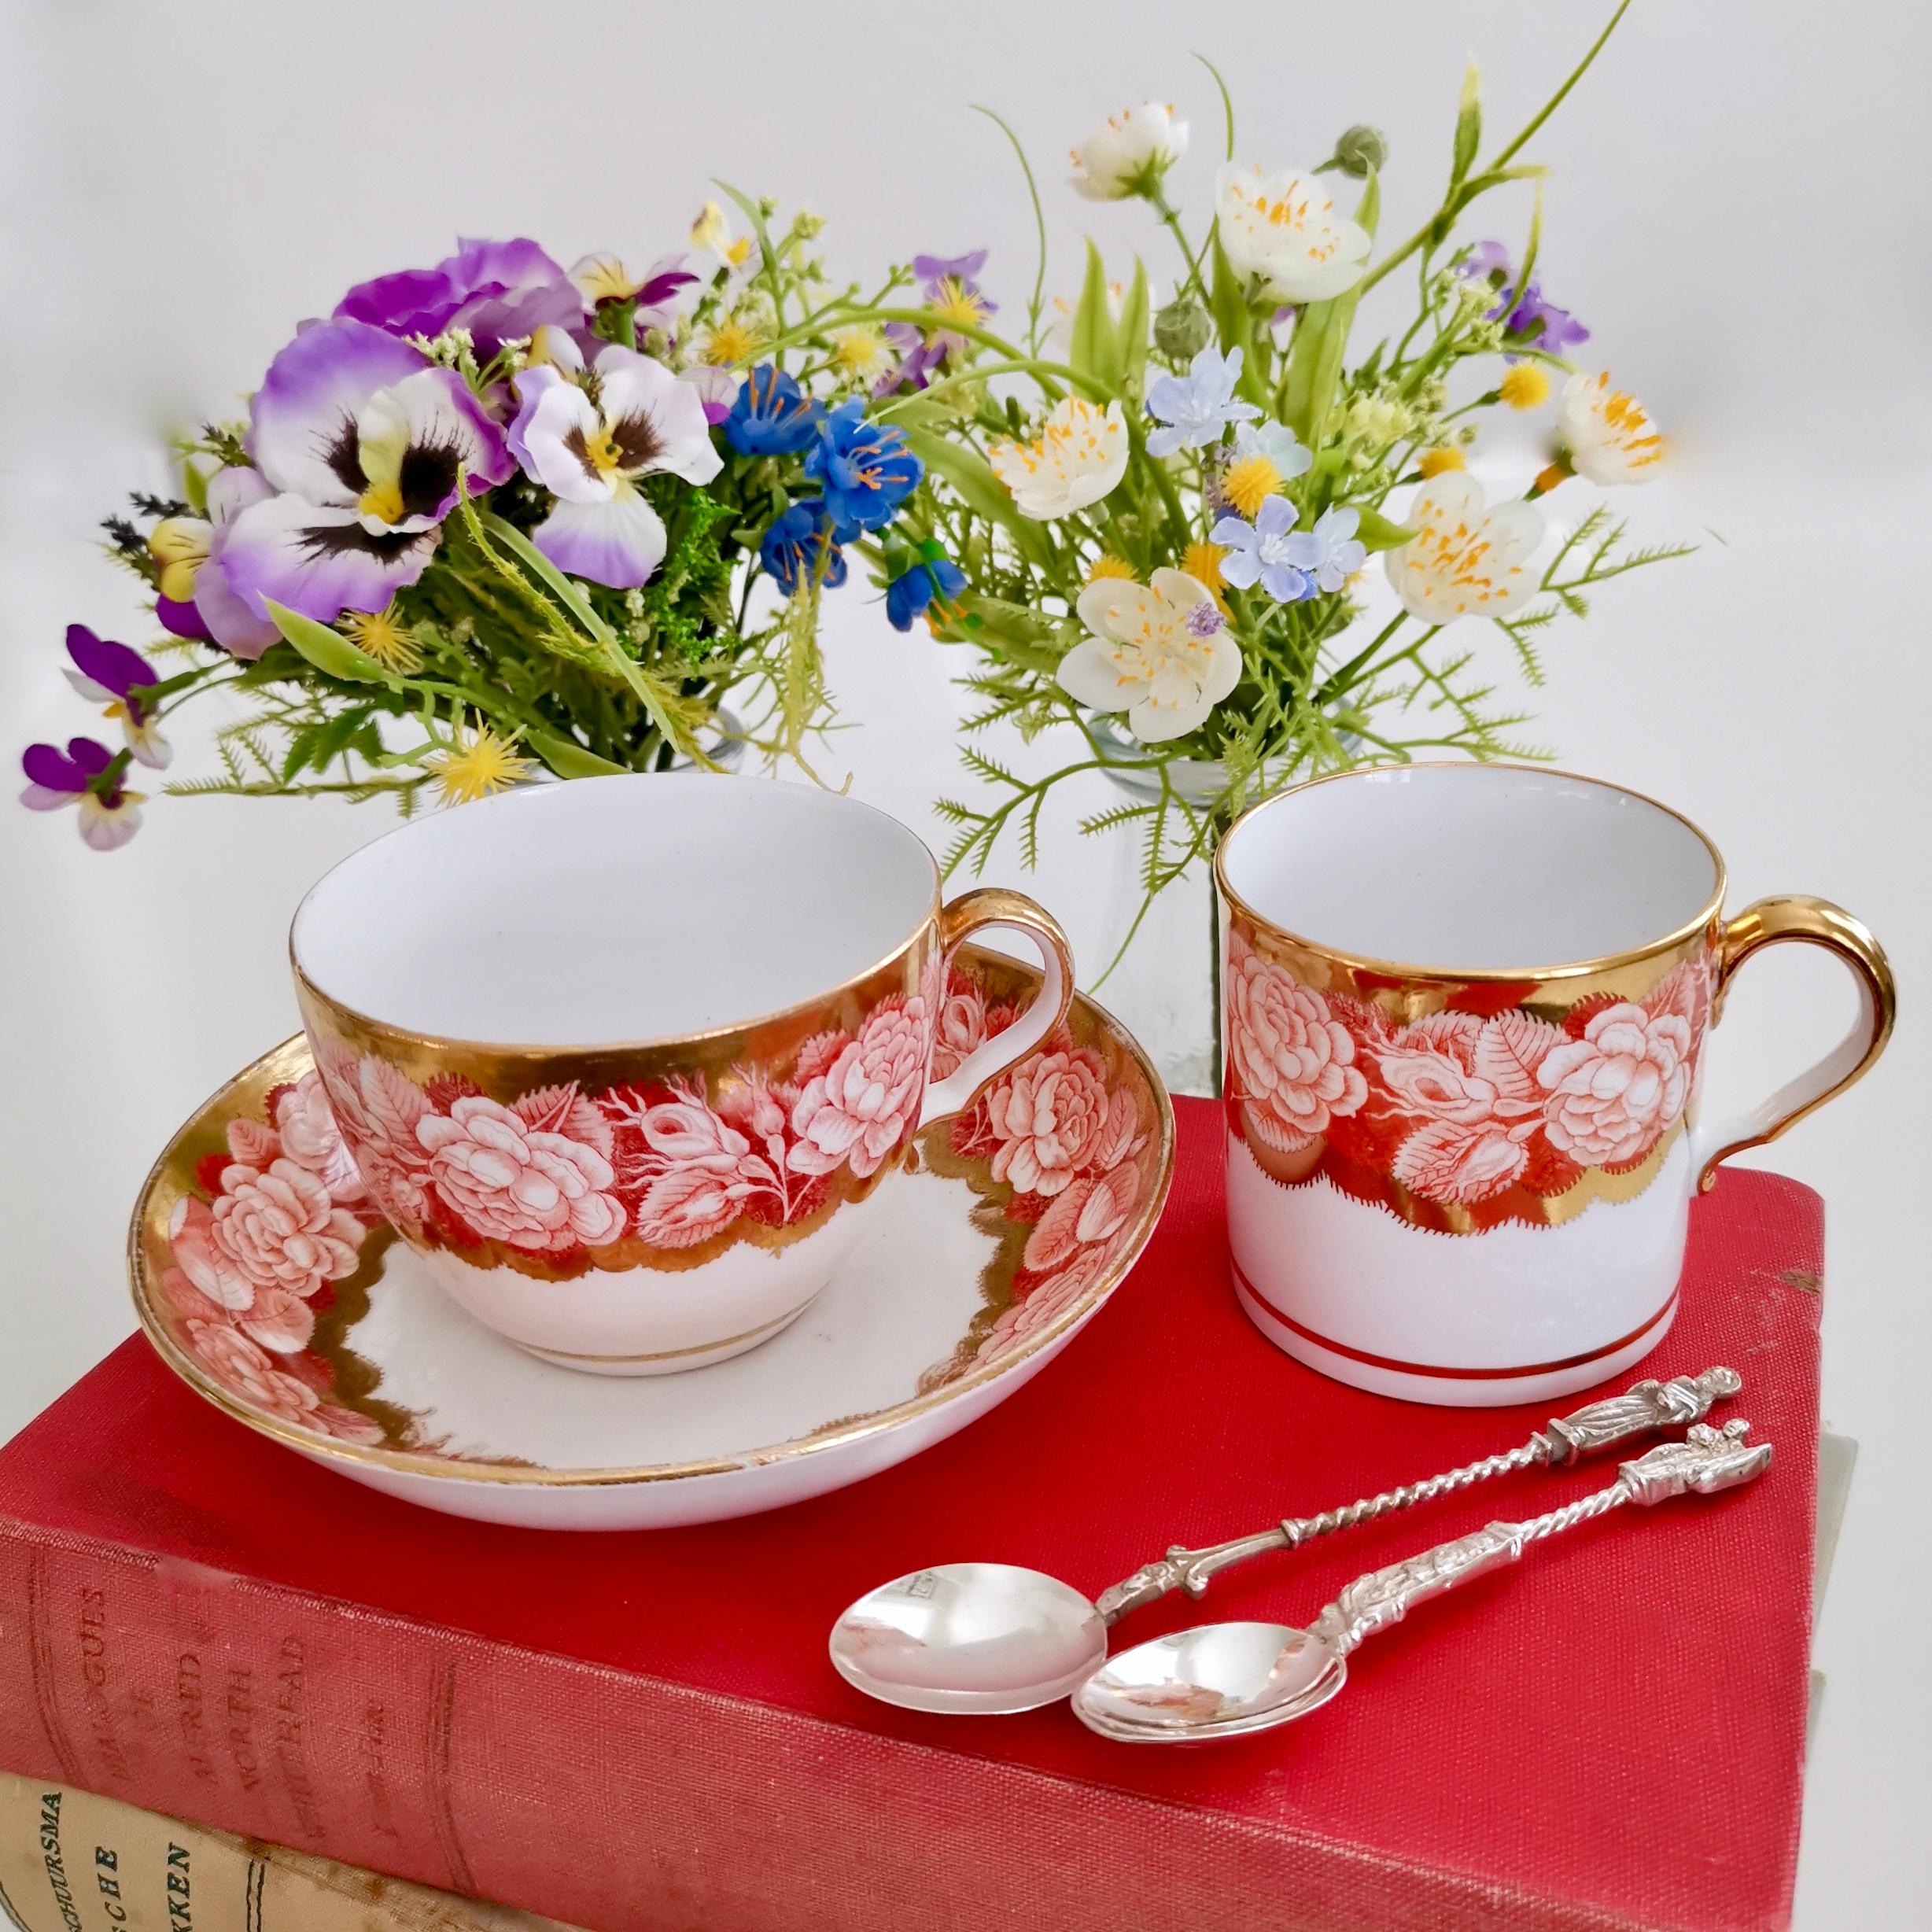 This is a beautiful trio consisting of a teacup, a coffee cup and a saucer, made by Spode in or shortly after 1806, which was the late Georgian period. It is decorated with the Rose Border in red, applied by pluck and dust printing. In the late 18th